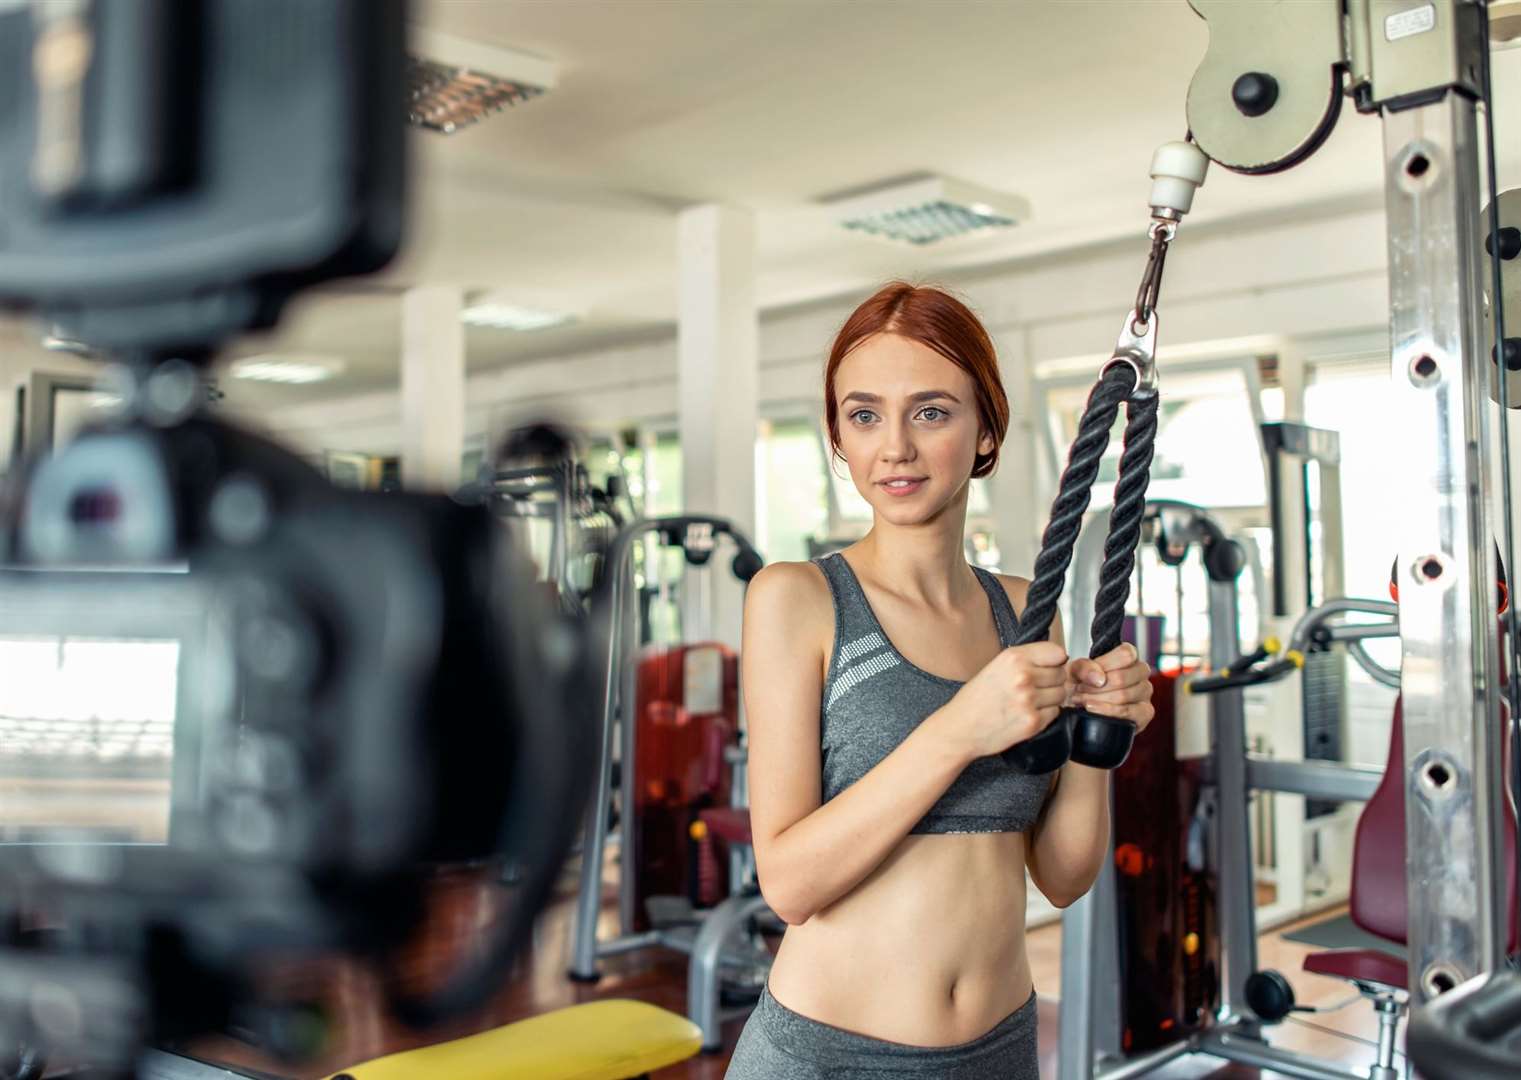 Should people be banned from vlogging in the gym? Picture: iStock / bluecinema